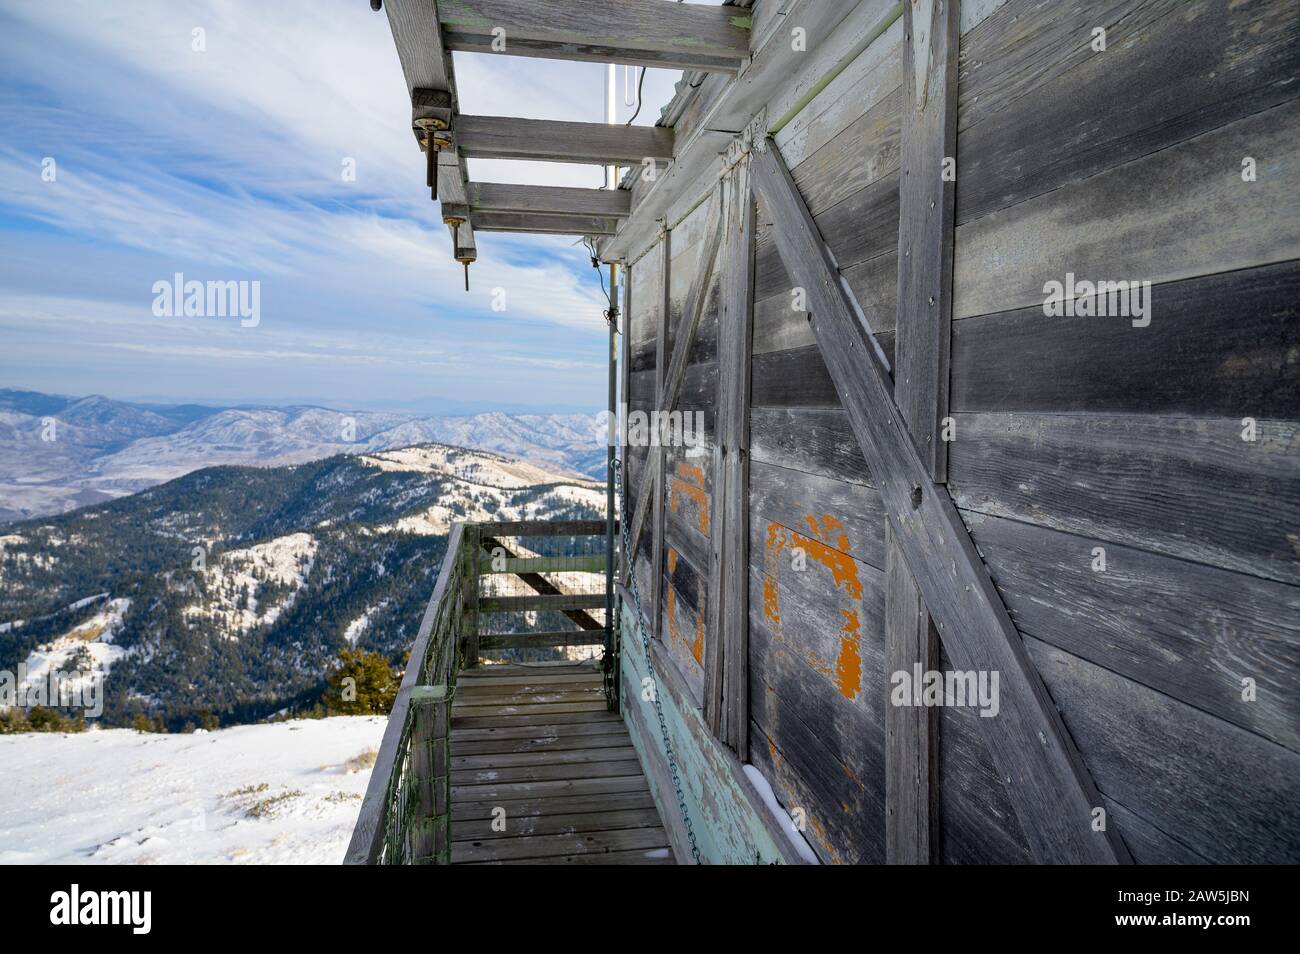 Fire Lookout Tower In The Mountains Stock Photo